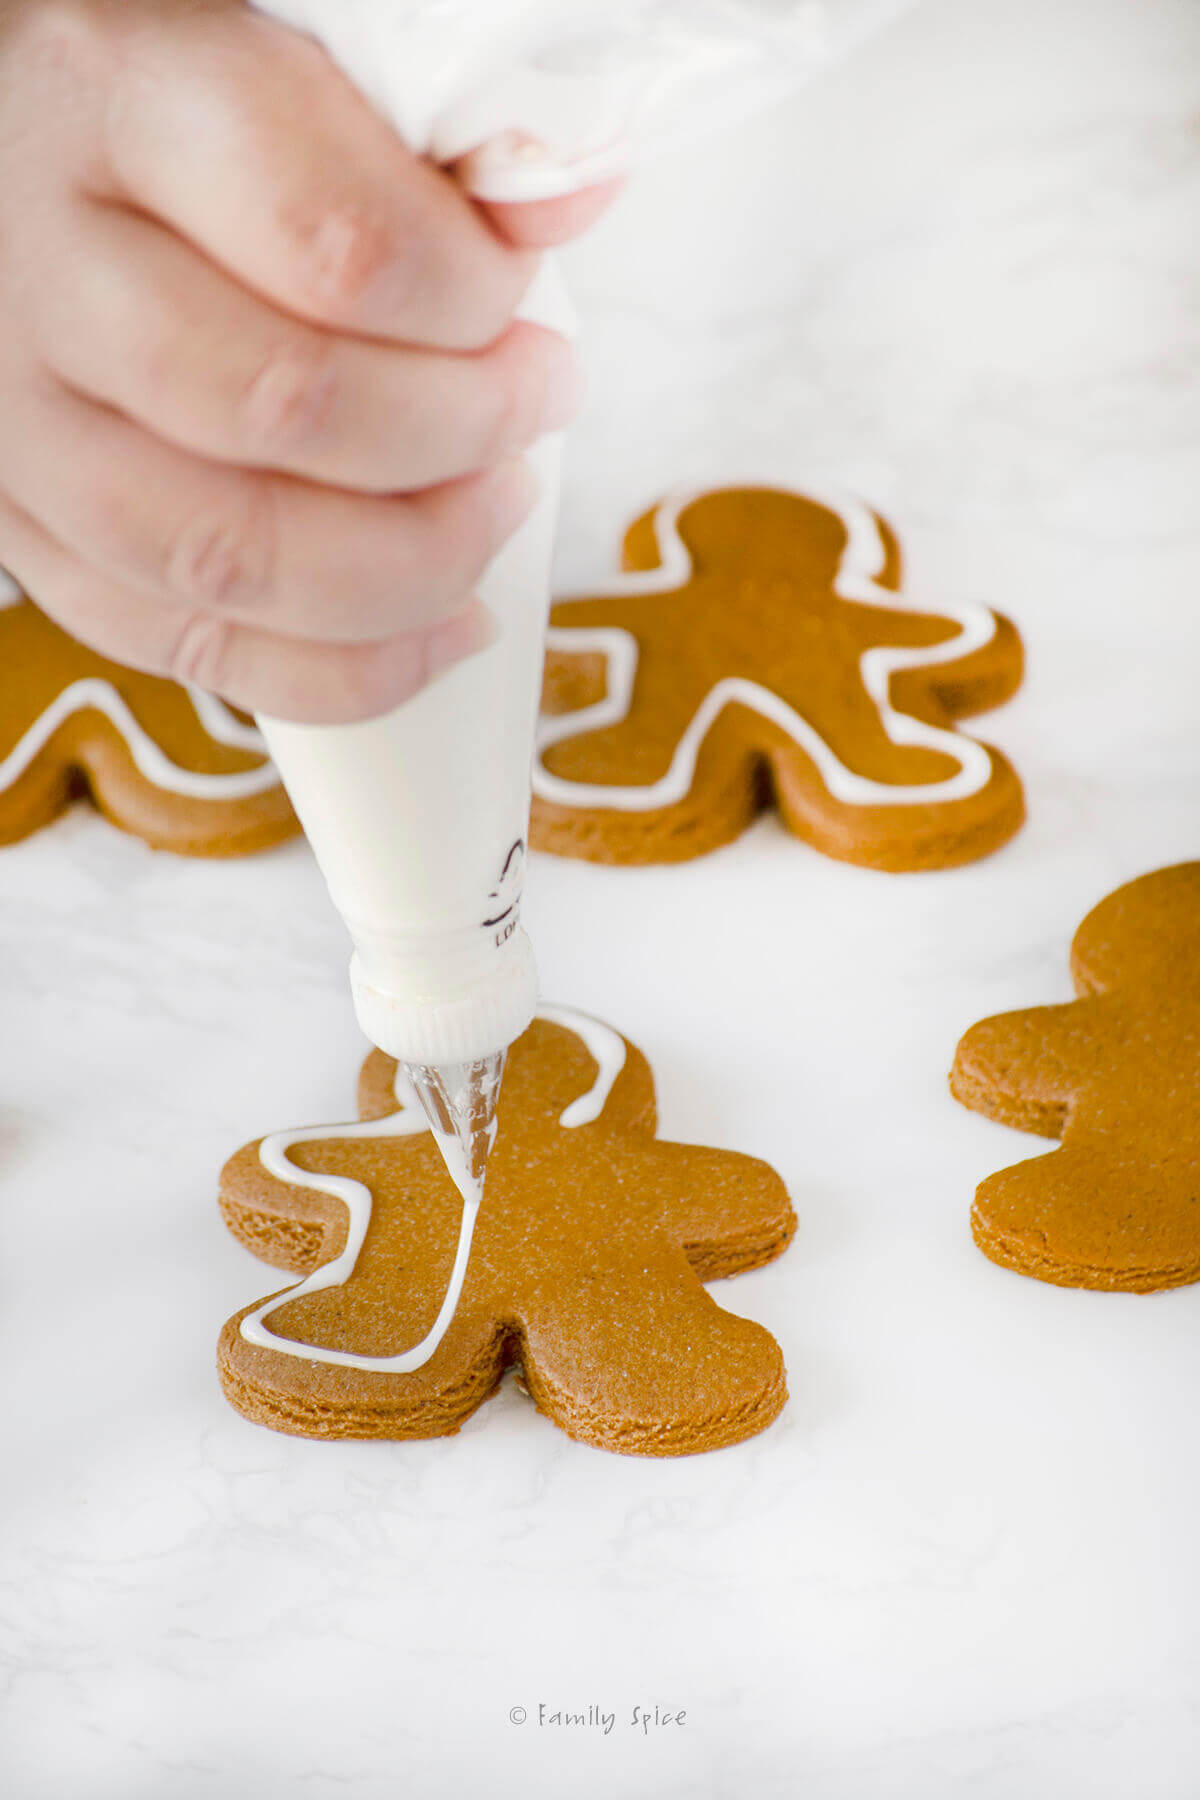 Icing a white border around the edges of a gingerbread man cookie